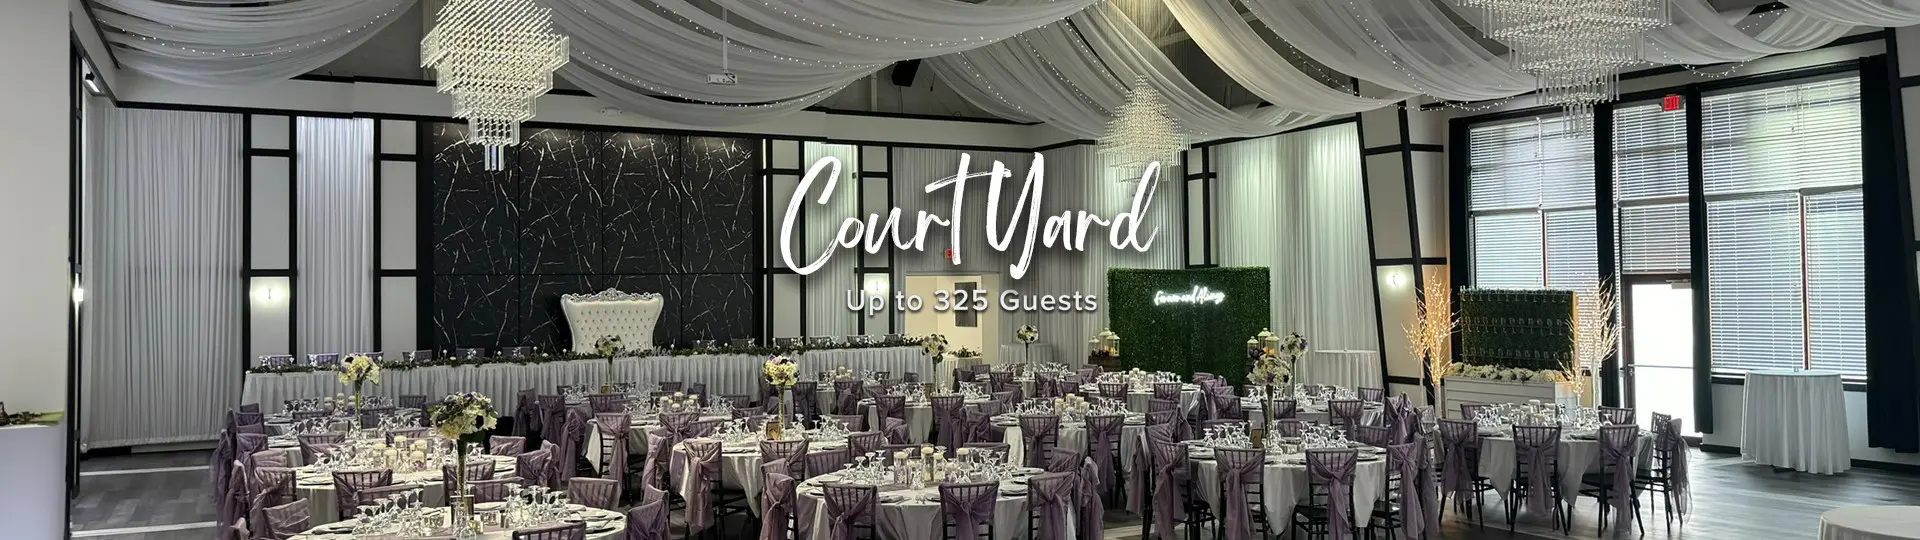 Court Yard Wedding Venue up to 325 Guests at Celebrations on the River La Crosse, WI